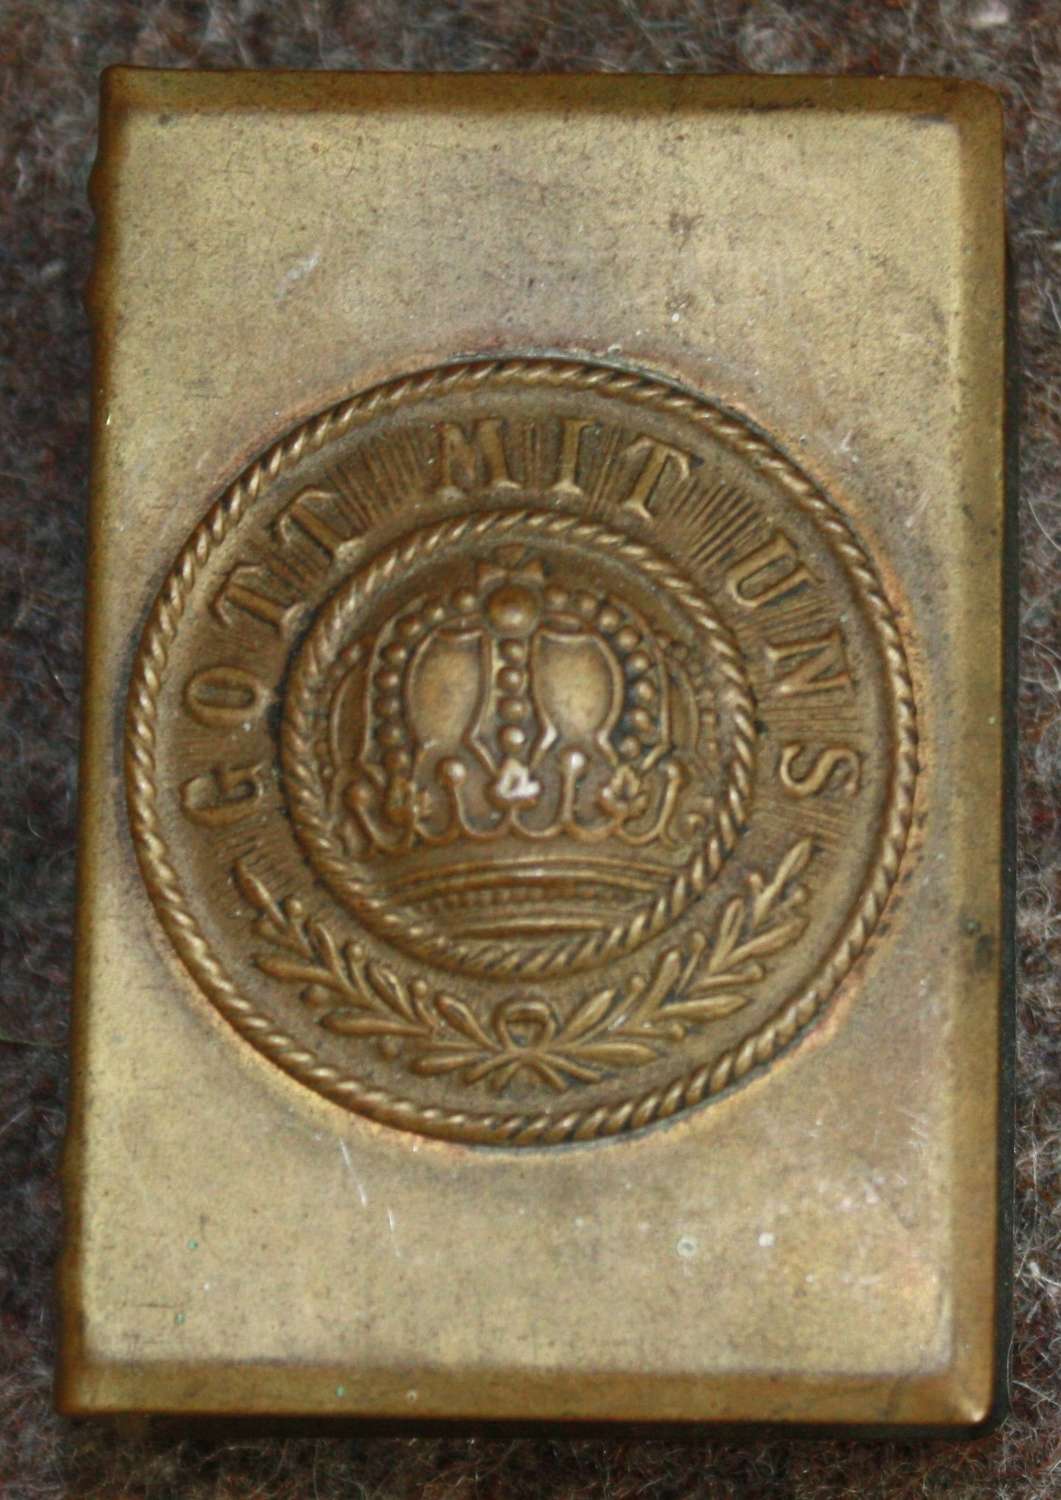 A WWI MATCH BOX COVER WITH A GERMAN PART OF BUCKLE